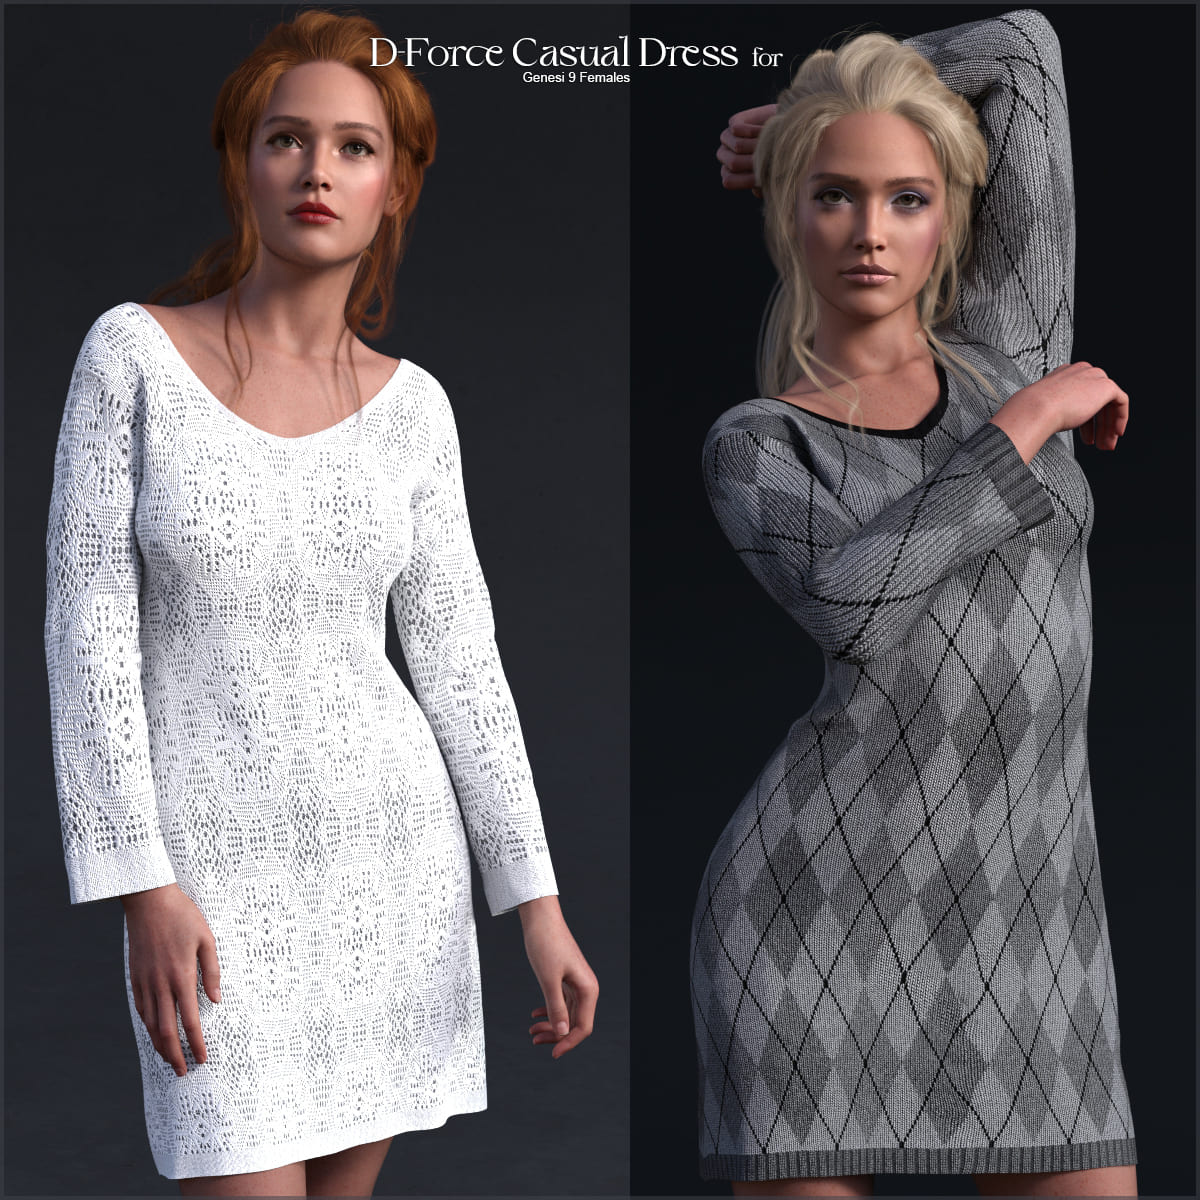 D-Force Casual Dress for G9 Females_DAZ3D下载站